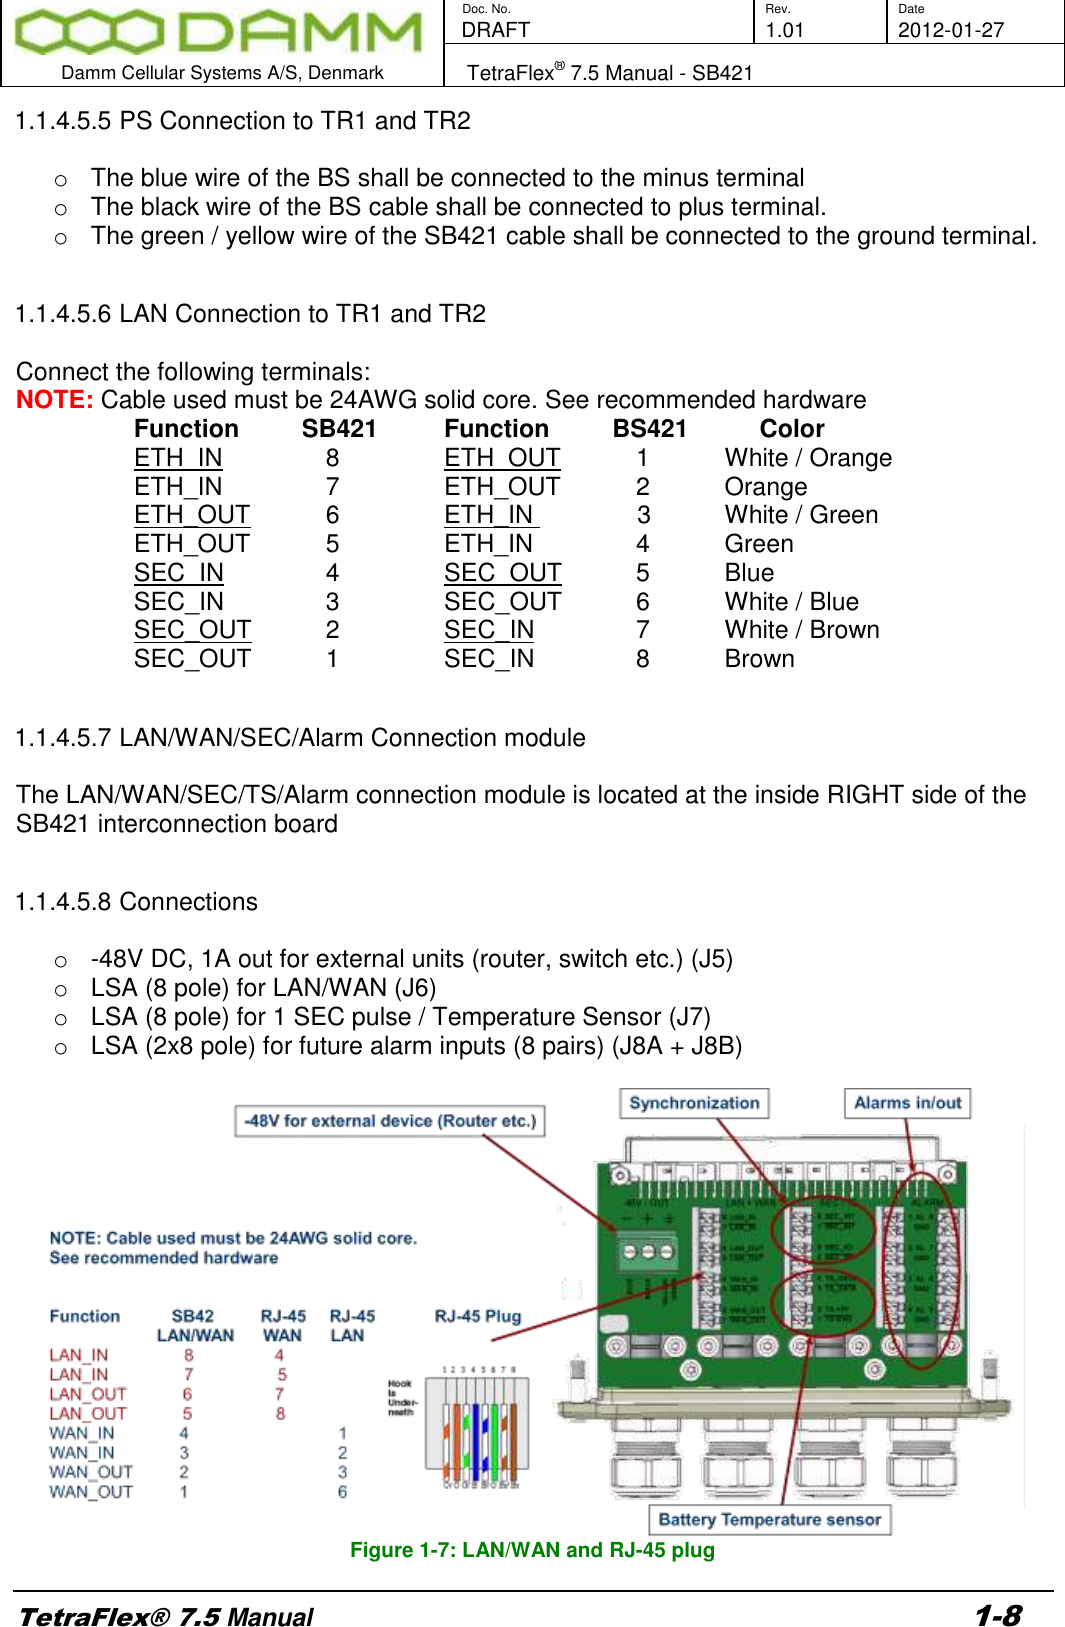        Doc. No. Rev. Date    DRAFT  1.01 2012-01-27  Damm Cellular Systems A/S, Denmark   TetraFlex® 7.5 Manual - SB421  TetraFlex® 7.5 Manual 1-8 1.1.4.5.5 PS Connection to TR1 and TR2  o  The blue wire of the BS shall be connected to the minus terminal o  The black wire of the BS cable shall be connected to plus terminal. o  The green / yellow wire of the SB421 cable shall be connected to the ground terminal.   1.1.4.5.6 LAN Connection to TR1 and TR2  Connect the following terminals: NOTE: Cable used must be 24AWG solid core. See recommended hardware Function         SB421  Function         BS421        Color ETH_IN  8  ETH_OUT  1    White / Orange ETH_IN               7  ETH_OUT  2    Orange ETH_OUT  6  ETH_IN               3    White / Green ETH_OUT  5   ETH_IN               4    Green SEC_IN  4  SEC_OUT  5    Blue SEC_IN  3   SEC_OUT  6    White / Blue SEC_OUT  2  SEC_IN  7    White / Brown SEC_OUT  1  SEC_IN  8    Brown  1.1.4.5.7 LAN/WAN/SEC/Alarm Connection module  The LAN/WAN/SEC/TS/Alarm connection module is located at the inside RIGHT side of the SB421 interconnection board  1.1.4.5.8 Connections  o  -48V DC, 1A out for external units (router, switch etc.) (J5) o  LSA (8 pole) for LAN/WAN (J6) o  LSA (8 pole) for 1 SEC pulse / Temperature Sensor (J7) o  LSA (2x8 pole) for future alarm inputs (8 pairs) (J8A + J8B)   Figure 1-7: LAN/WAN and RJ-45 plug 